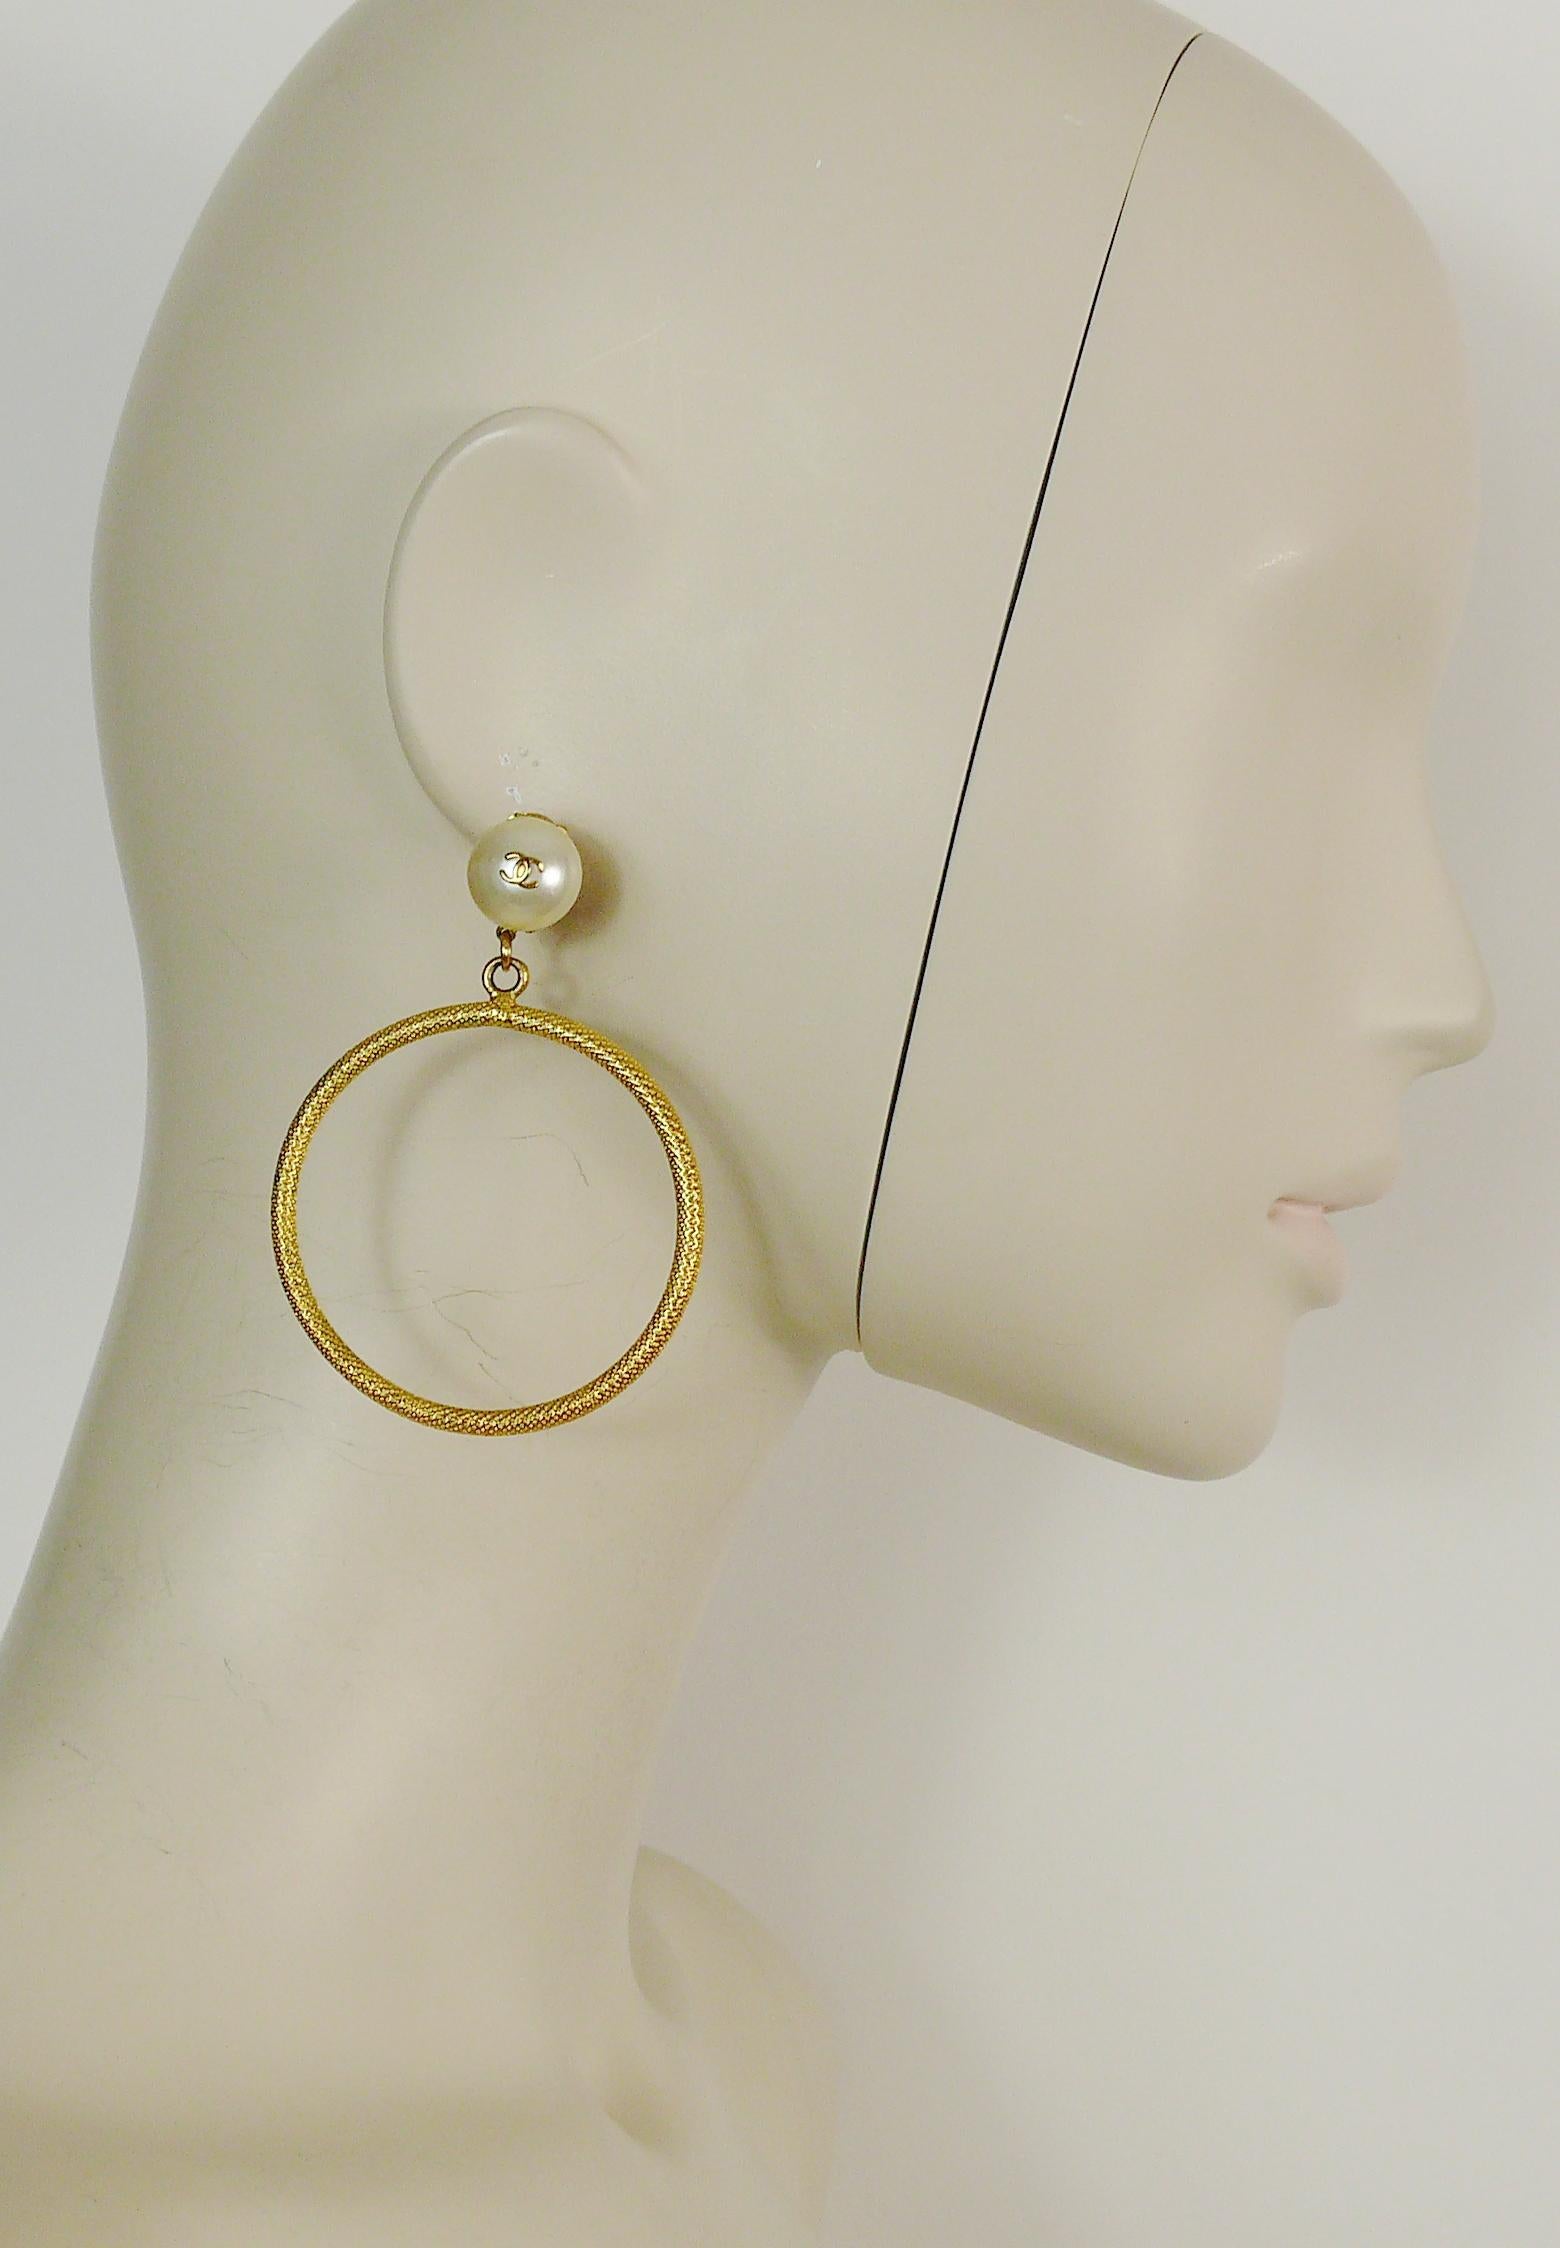 CHANEL vintage jumbo hoop earrings (clip-on) featuring a faux pearl with CC signature logo and a textured gold toned ring.

Embossed CHANEL 97 P Made in France.
Private sale mark S on the reverse sides (not visible when earrings are beeing